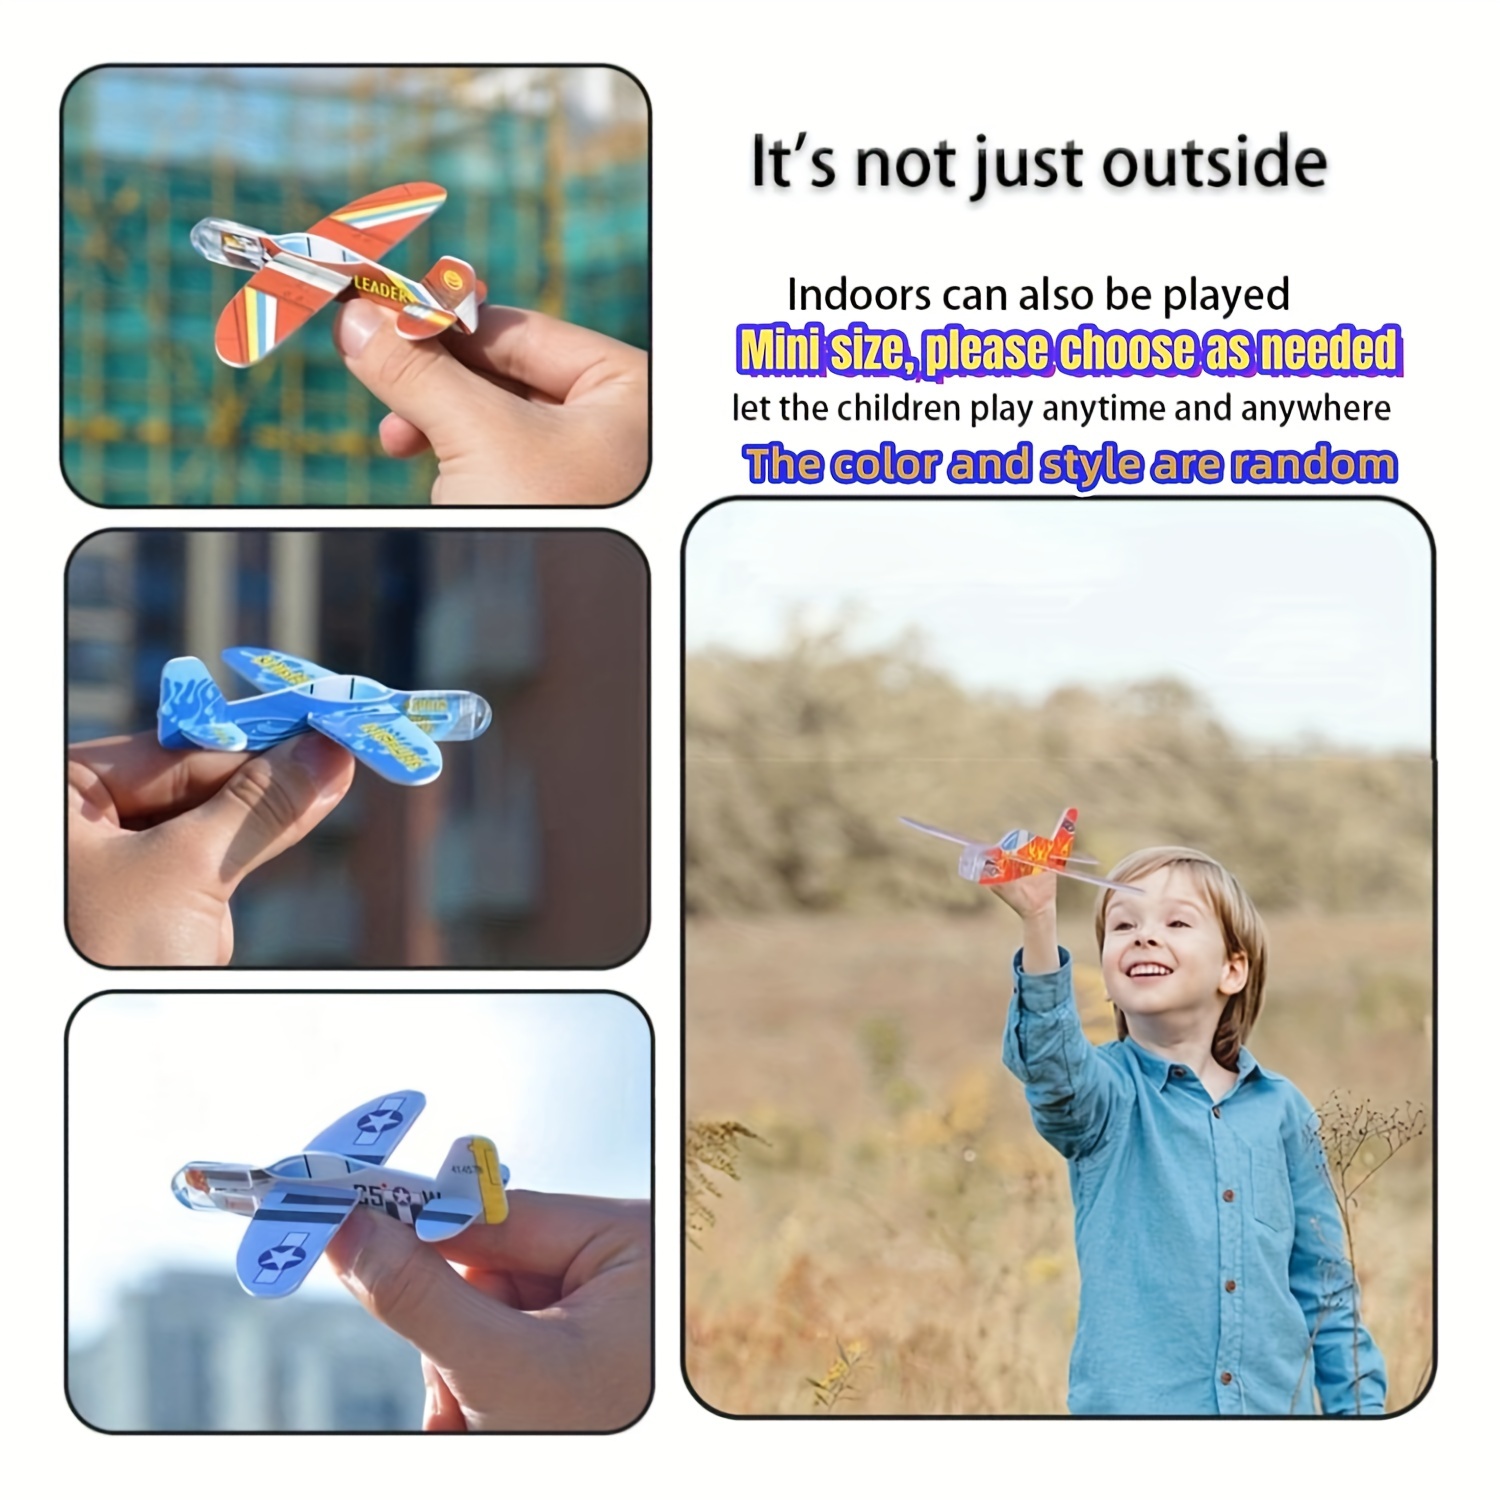 8 Airplane Toy,12 Different Designs Planes Toys For Boys,Foam Glider  Planes Toys,Birthday Favors Lightweight Paper Airplanes,Individually Packed